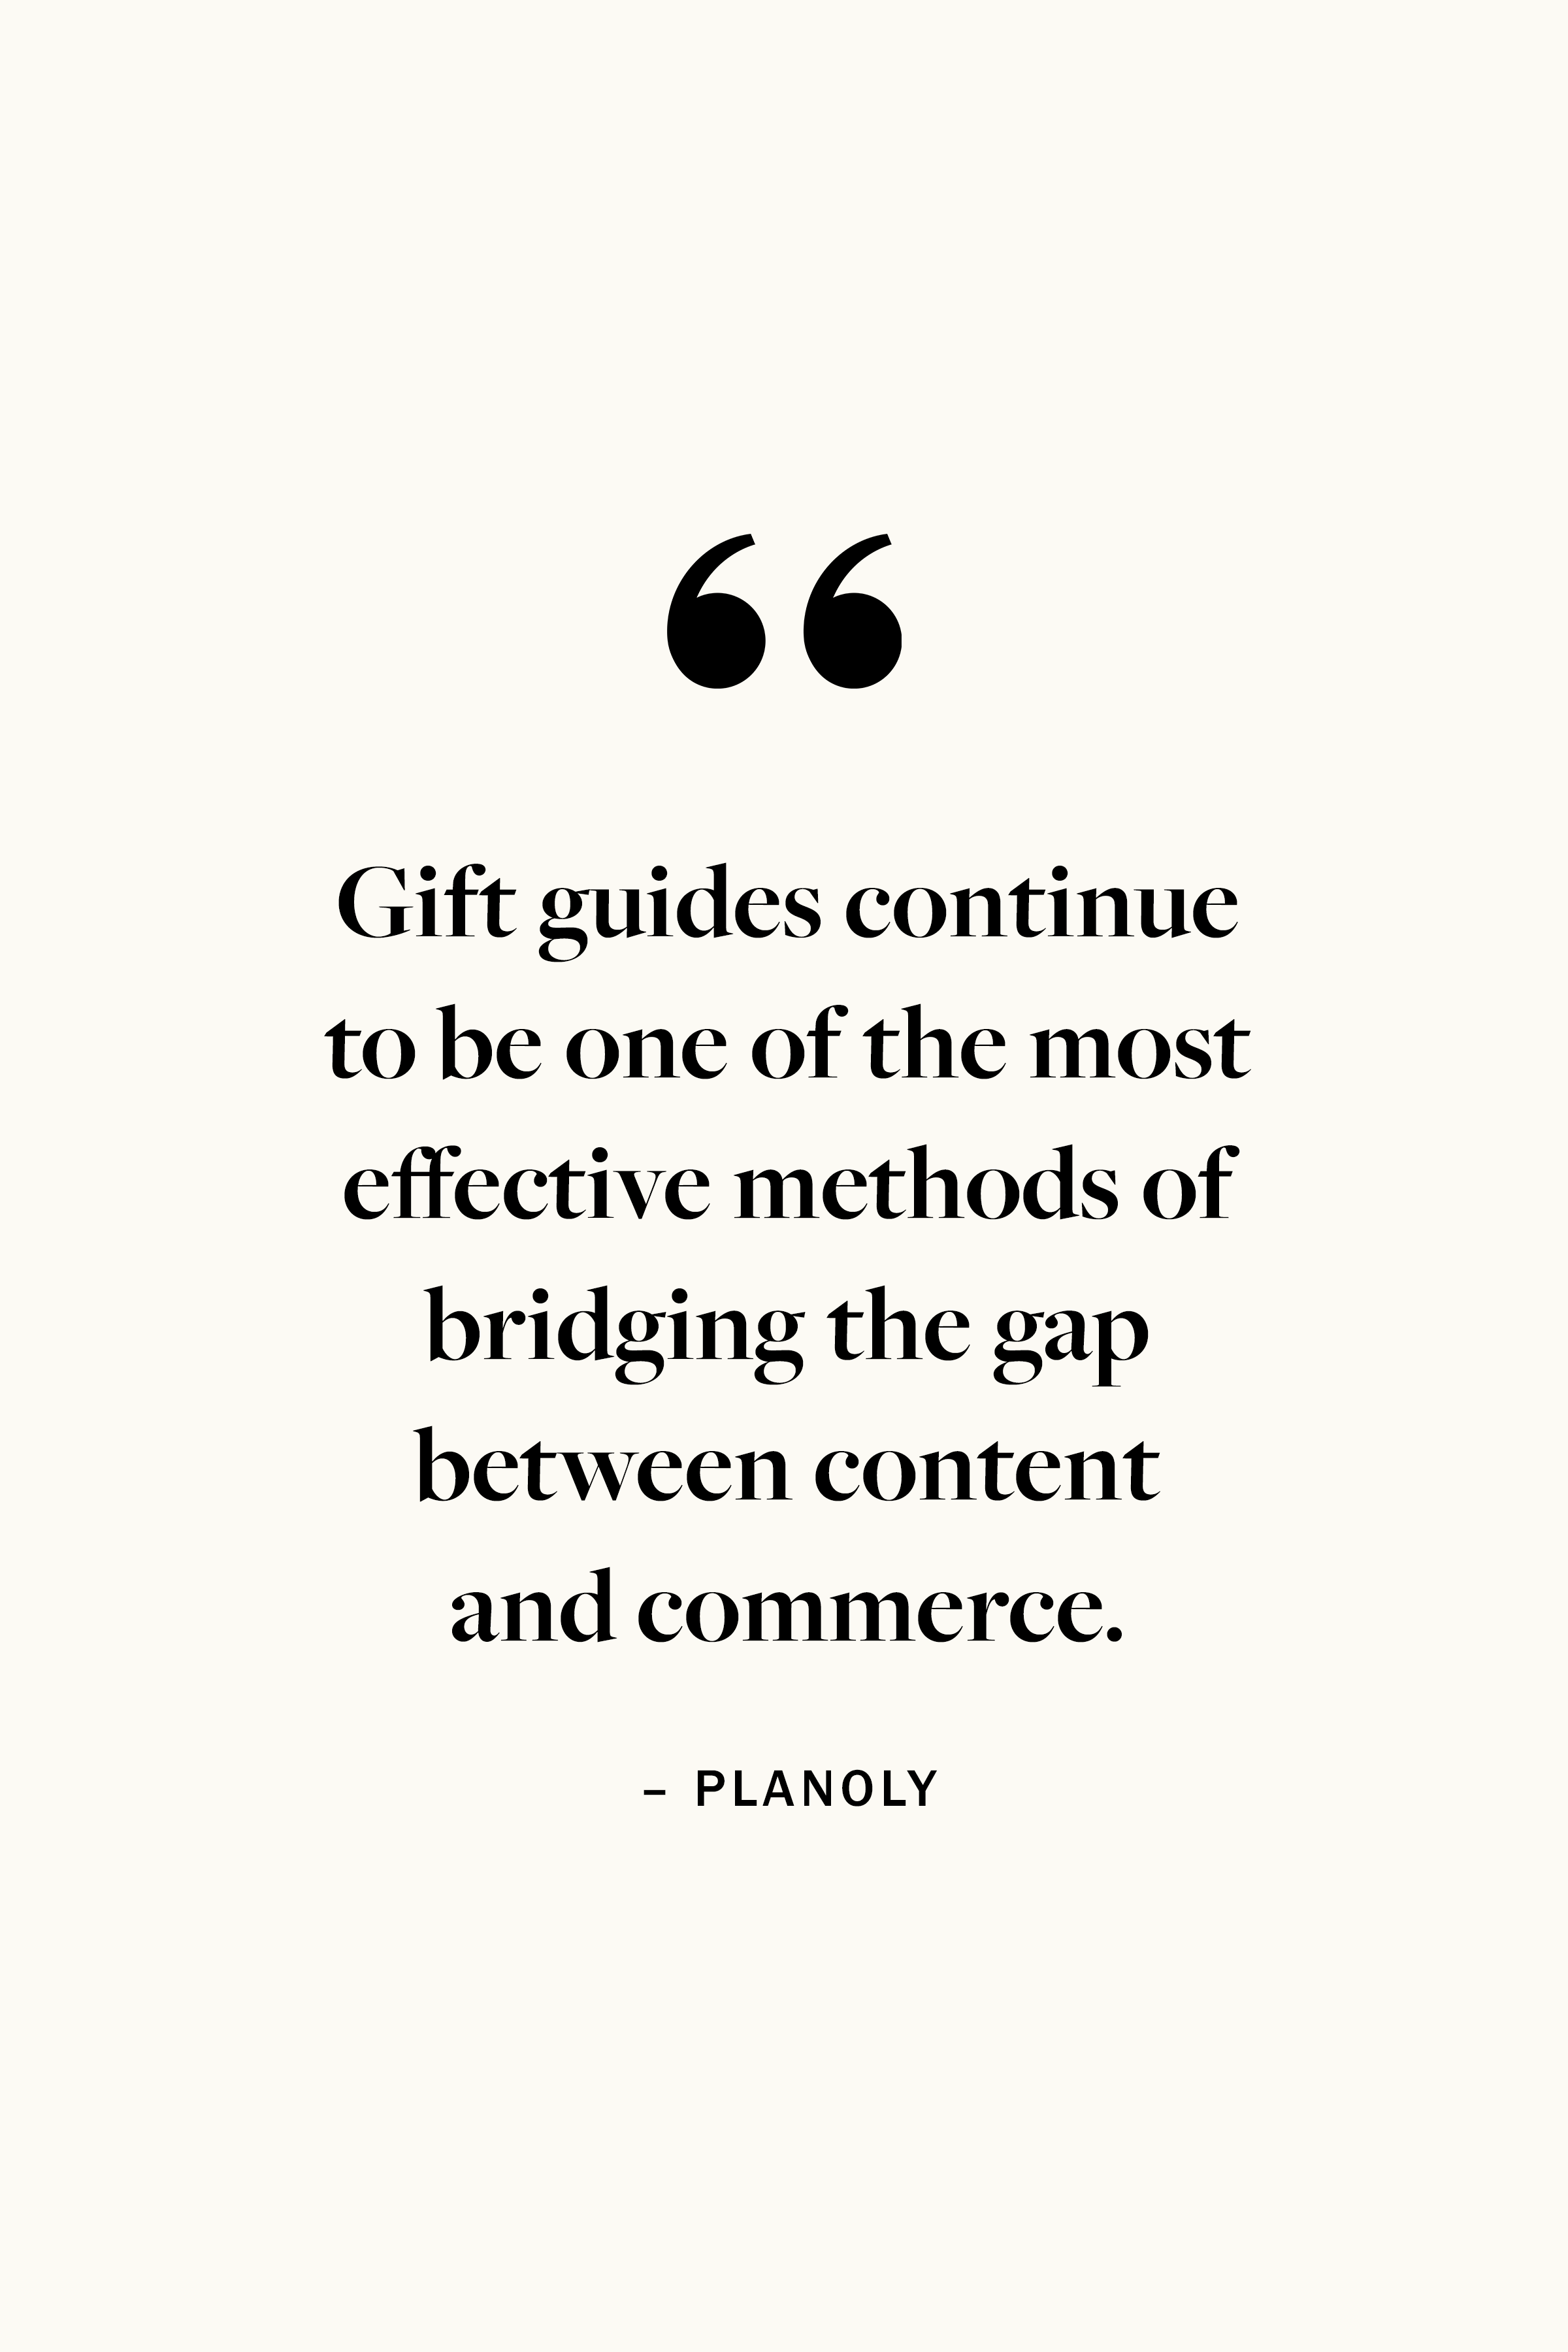 PLANOLY - Blog Post - How to Create a Gift Guide - Image 3